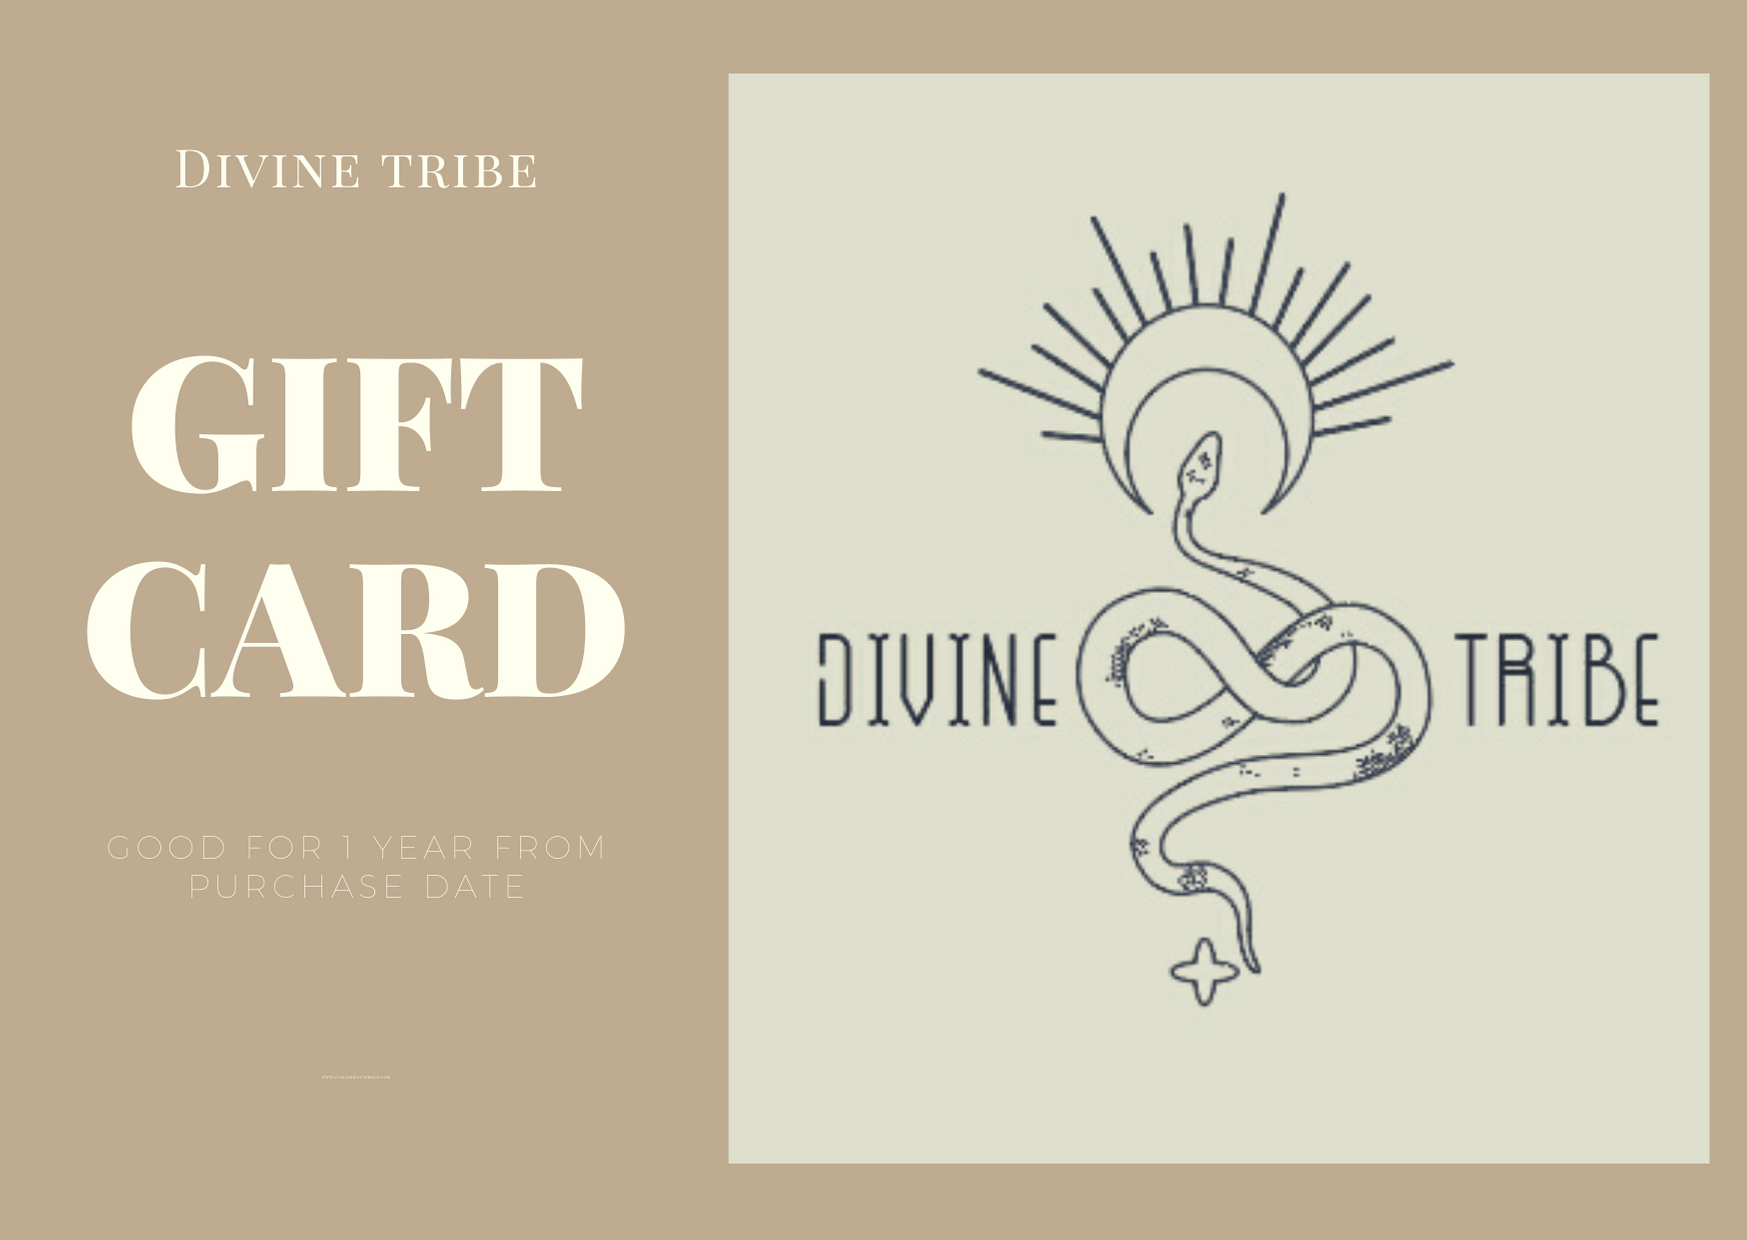 Divine Tribe Gift Card